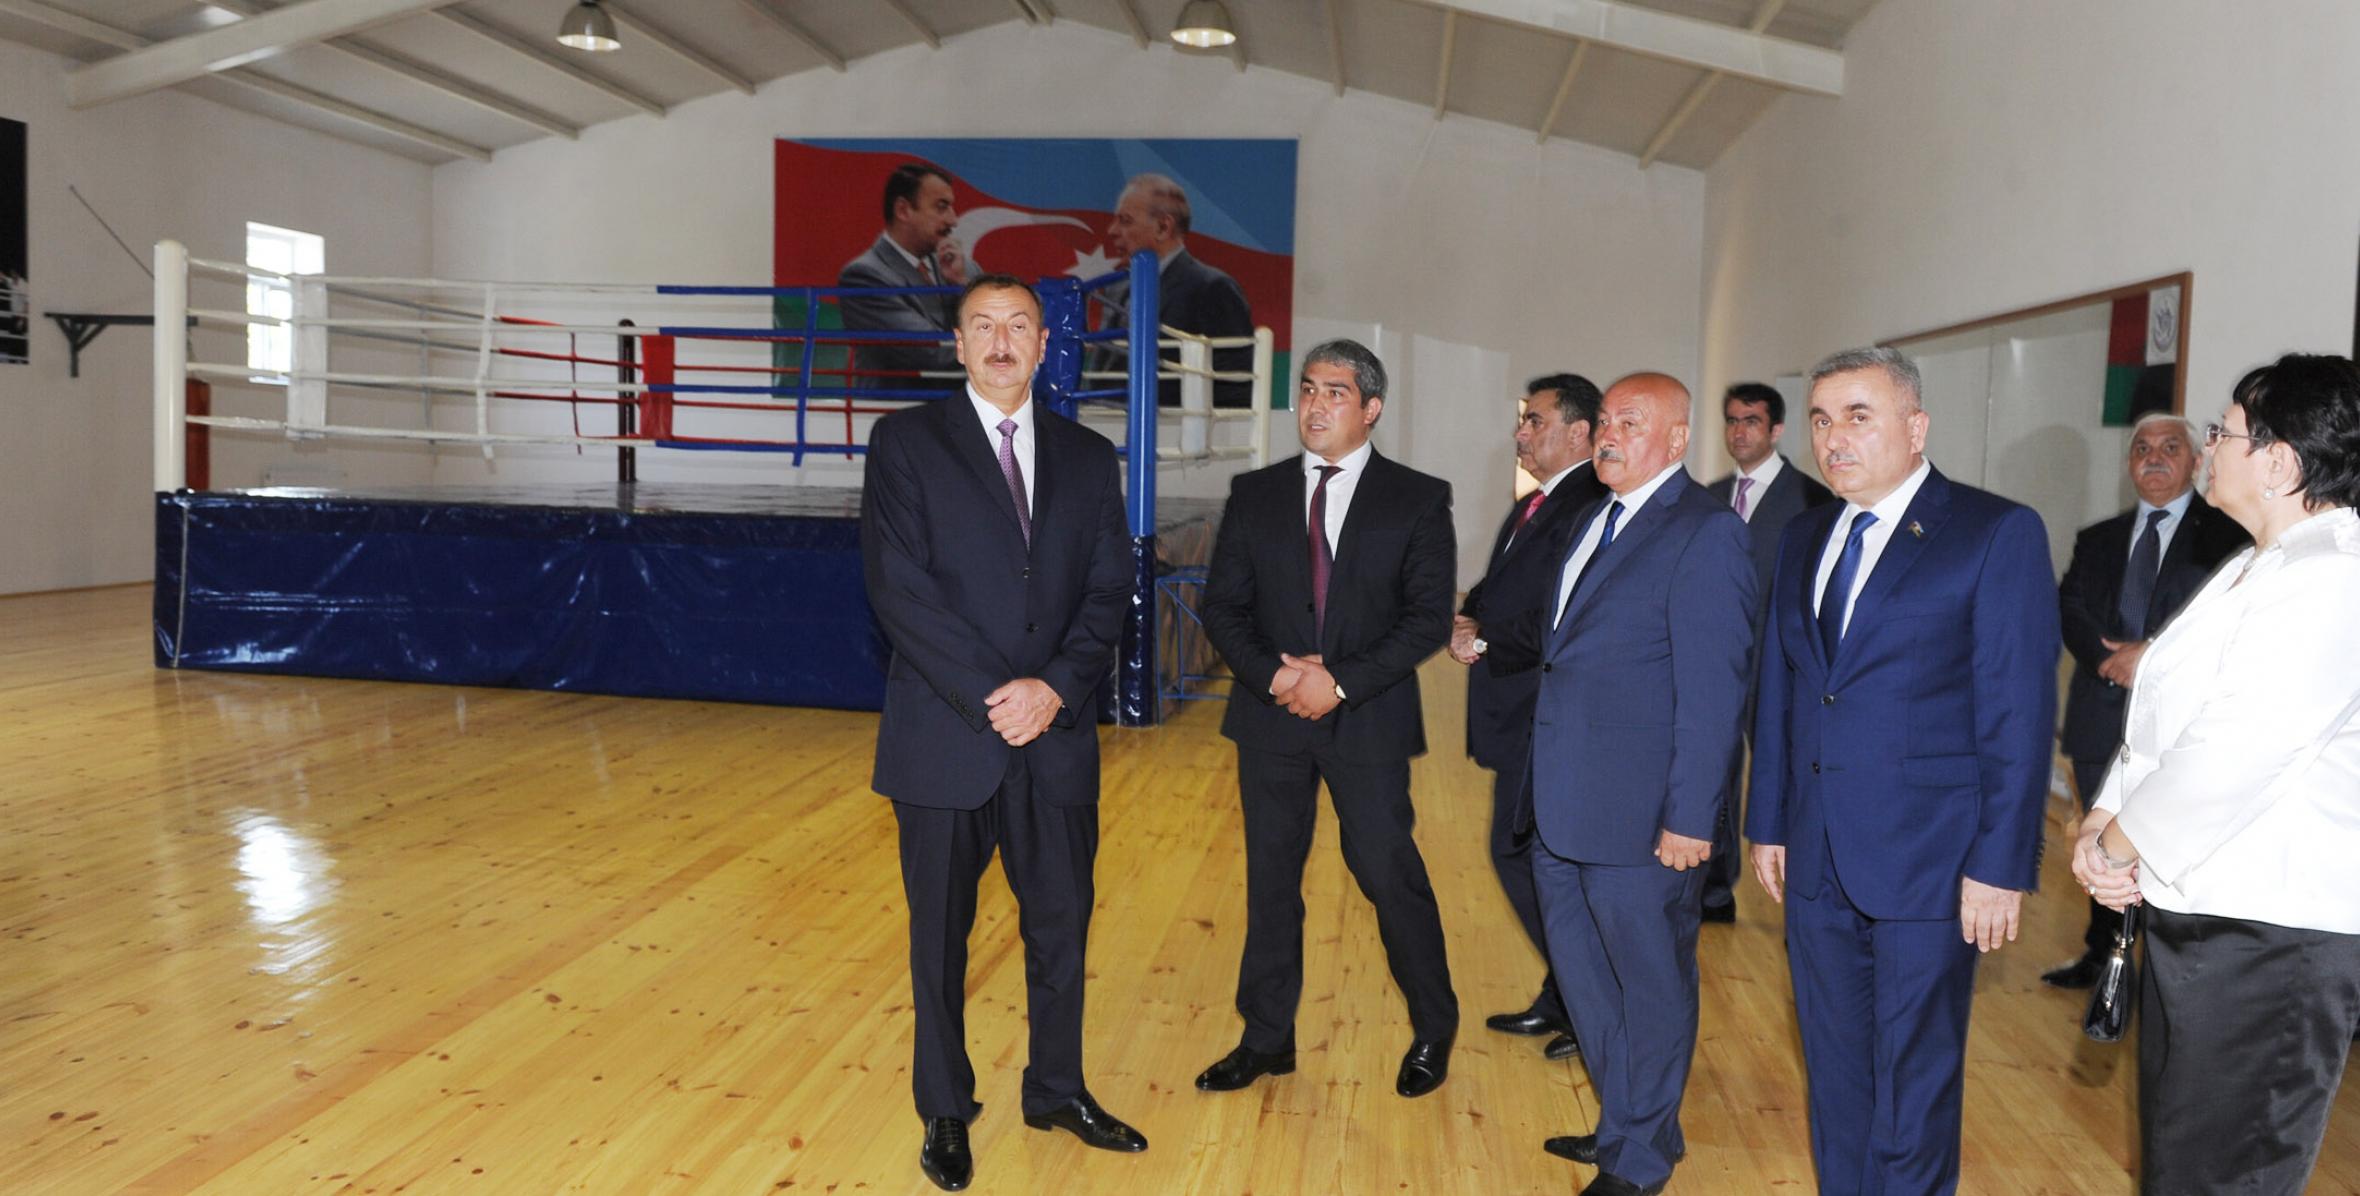 Ilham Aliyev attended the opening of the Masalli regional boxing center